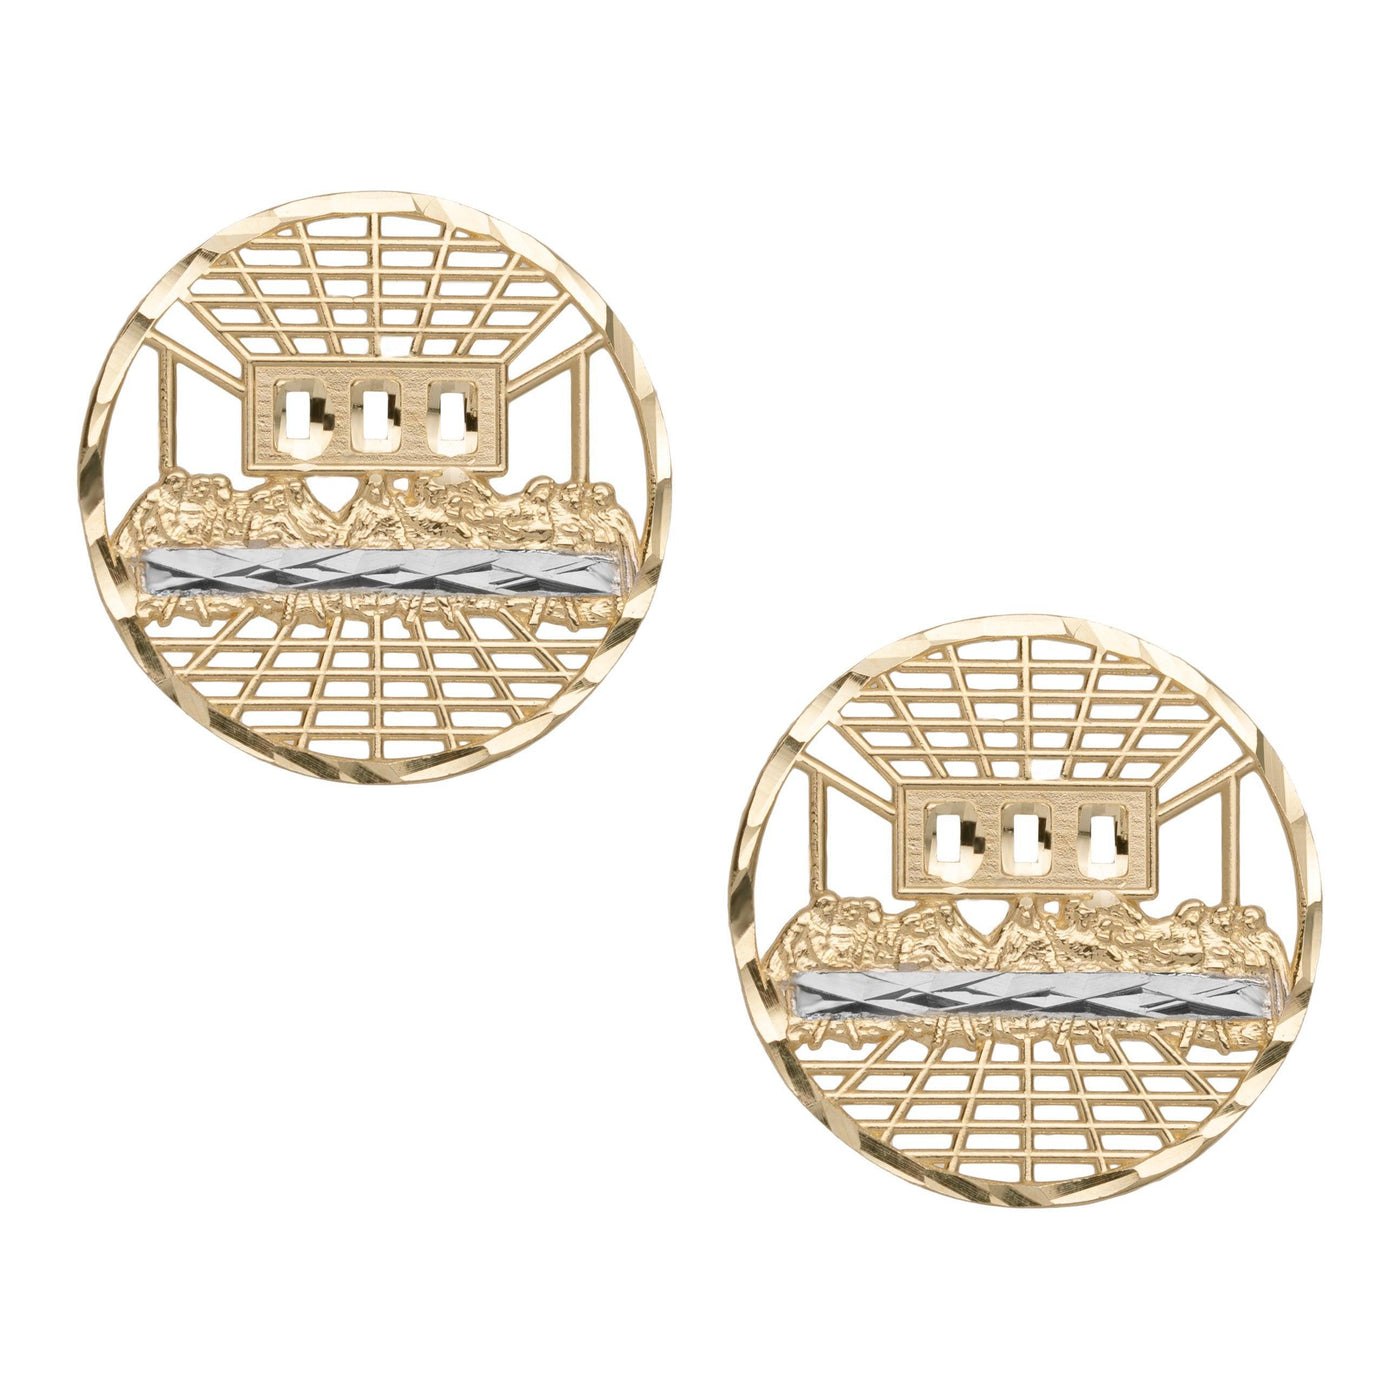 Round Diamond Cut the Last Supper Stud Earrings Solid 10k Yellow Gold - bayamjewelry